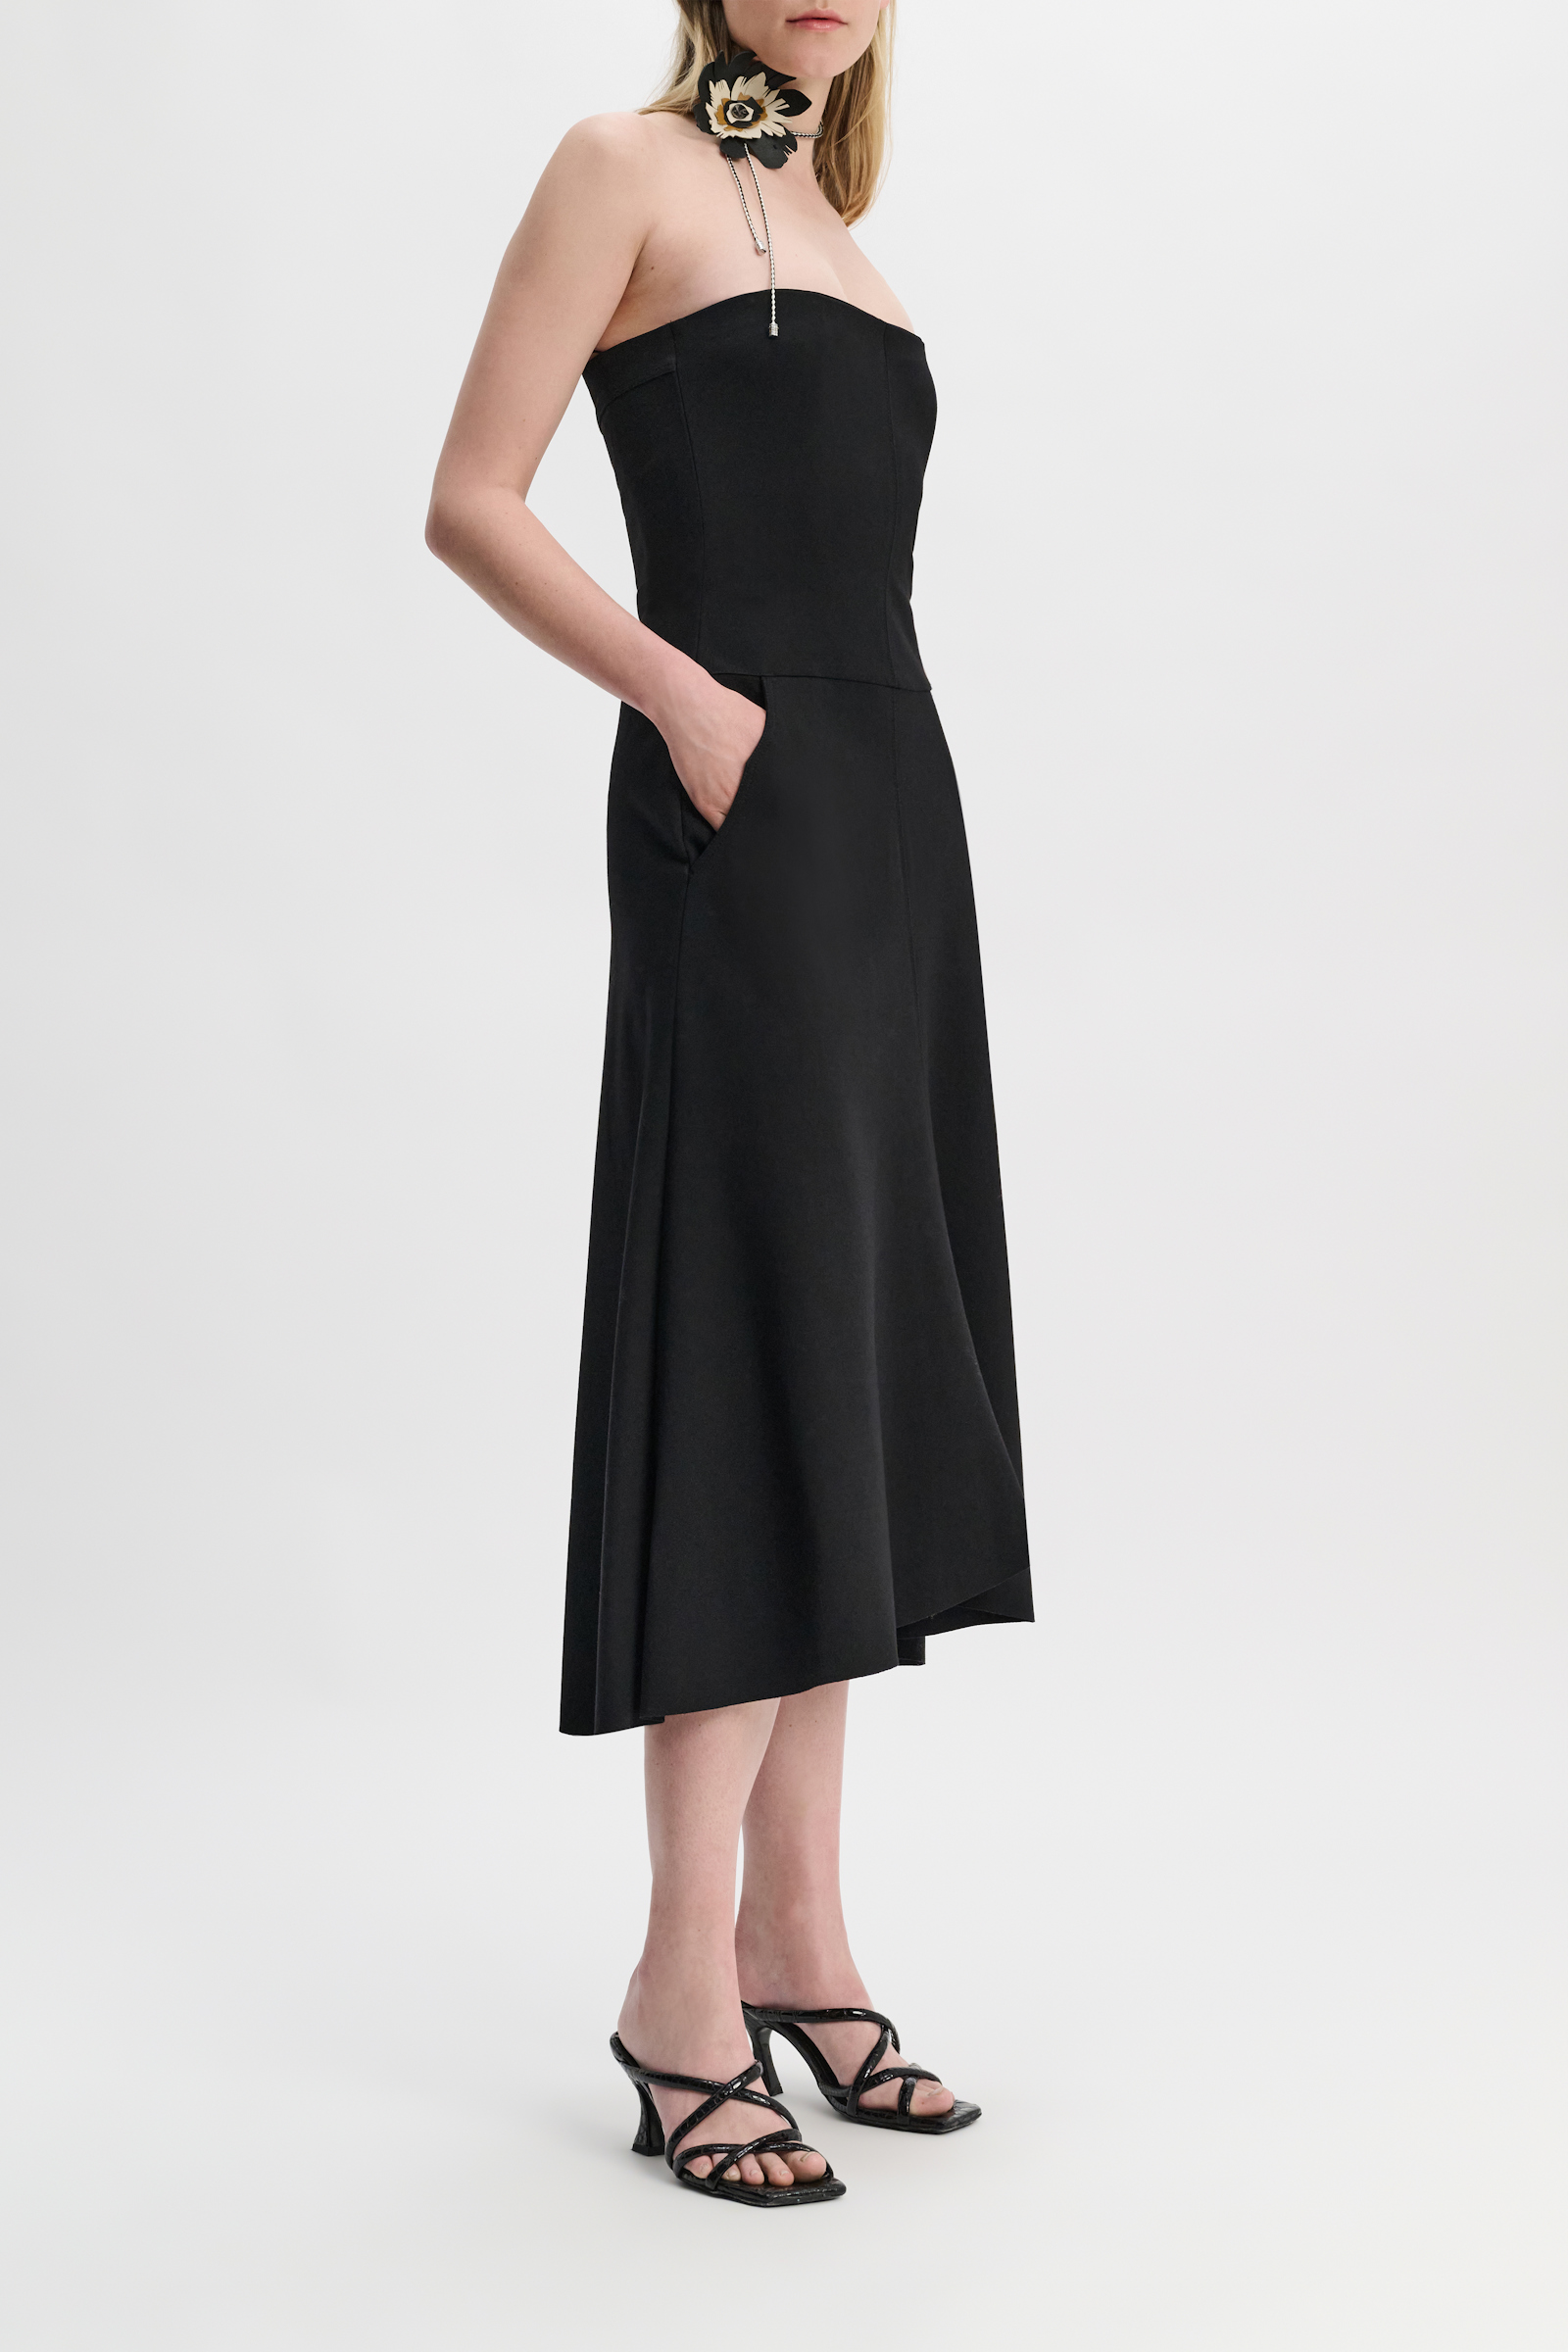 Dorothee Schumacher Corset dress in Punto Milano with Western details pure black